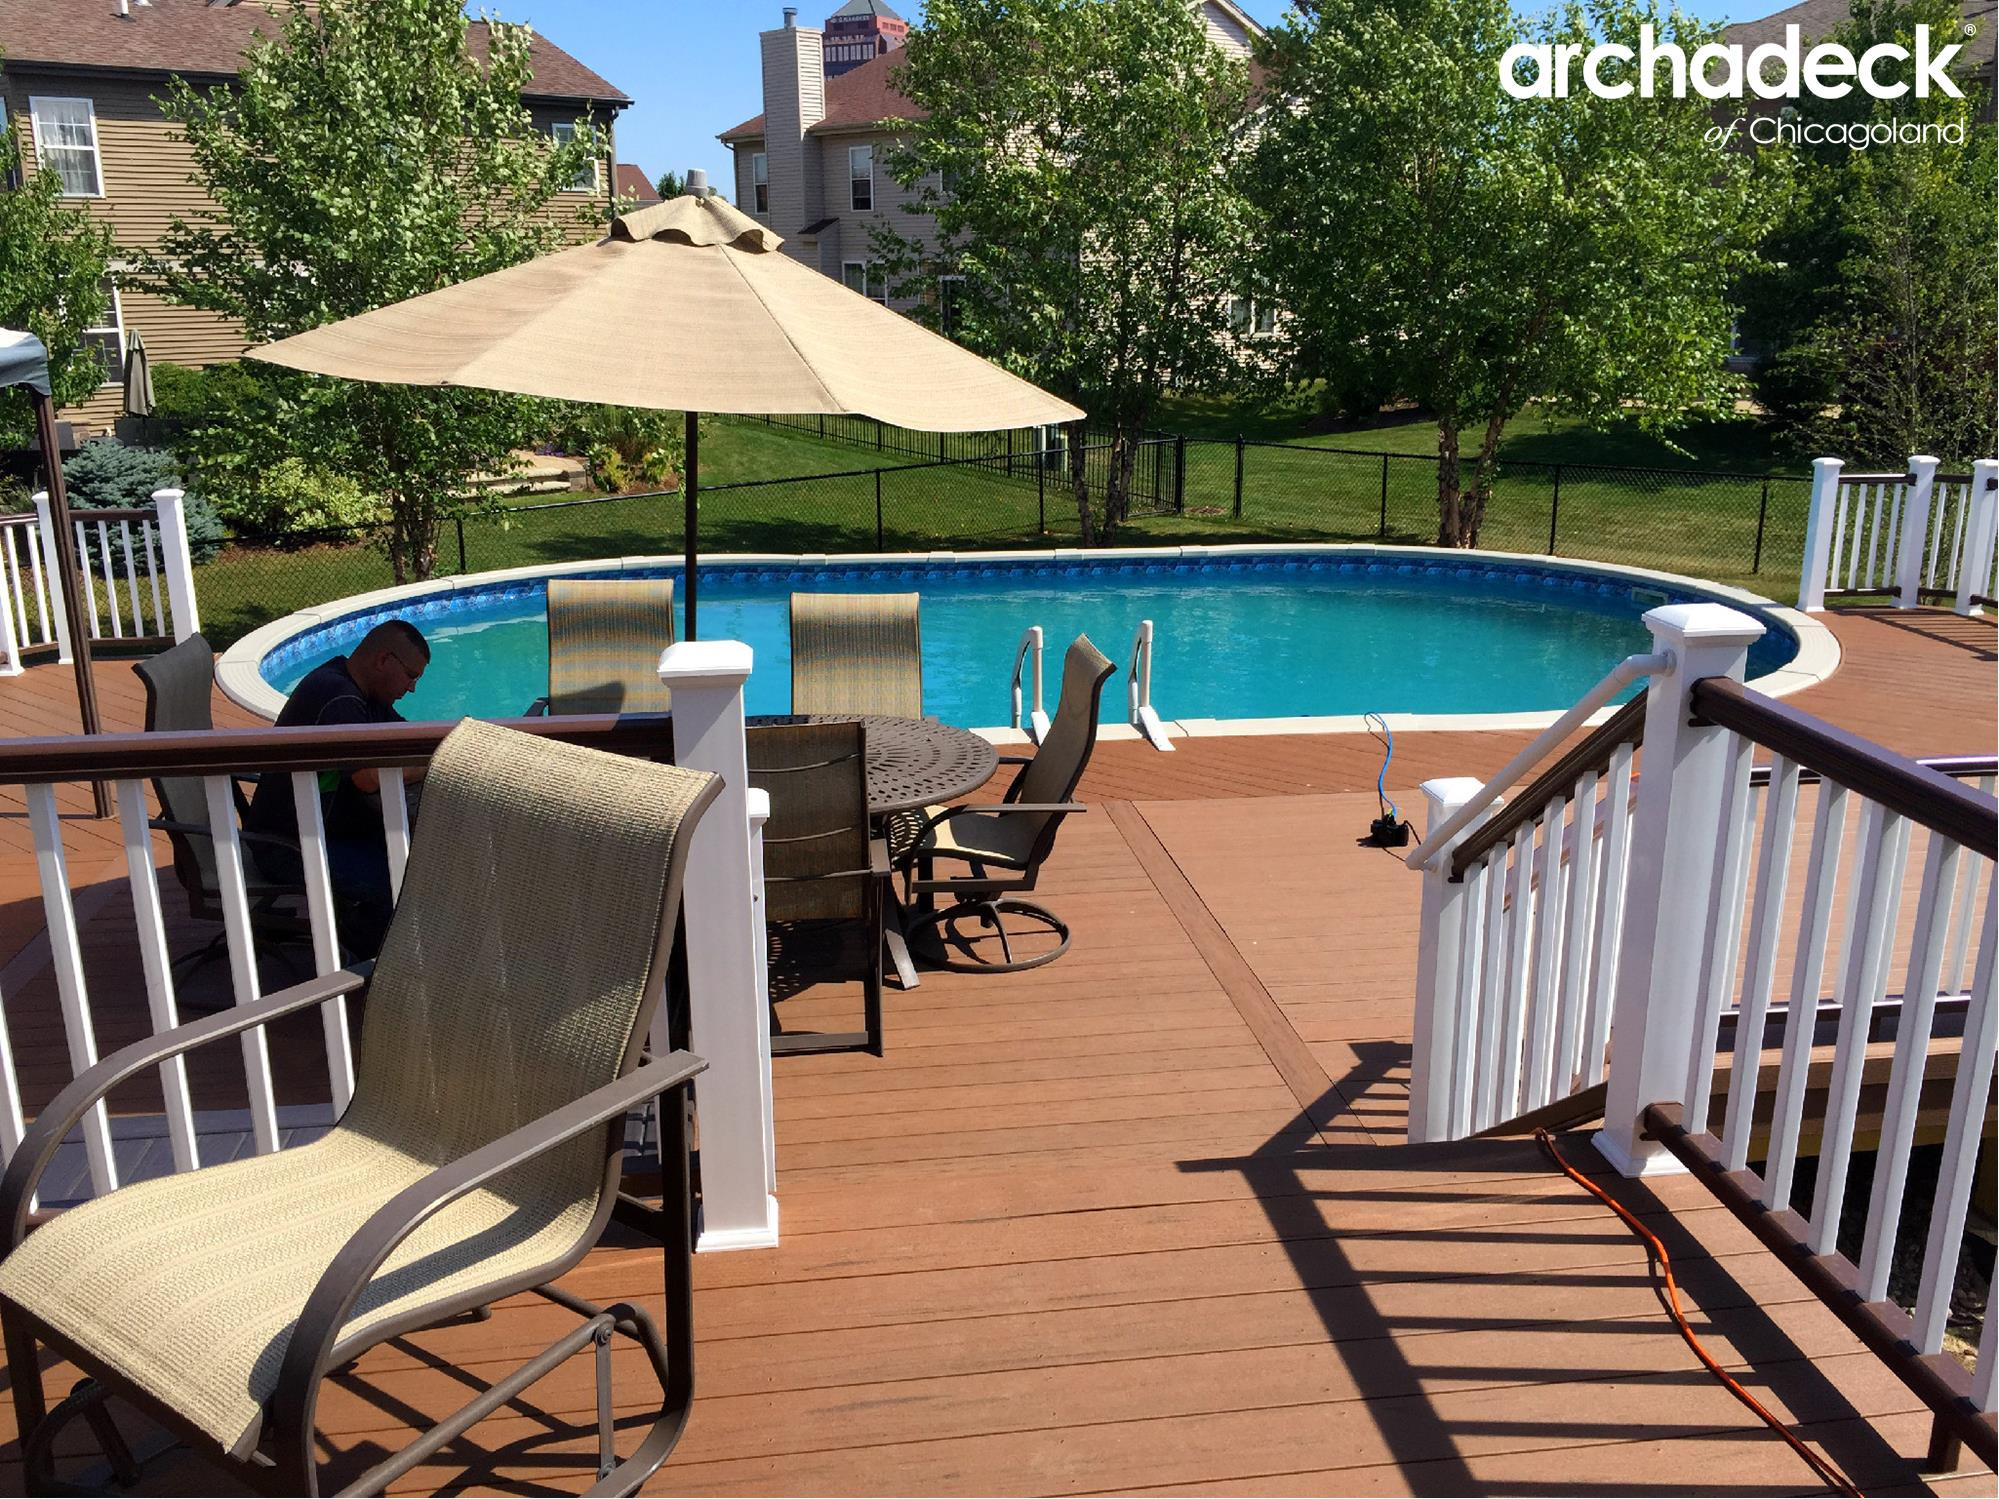 Above Ground Pool Decks Pictures
 Pool Deck Ideas for Chicagoland Homeowners